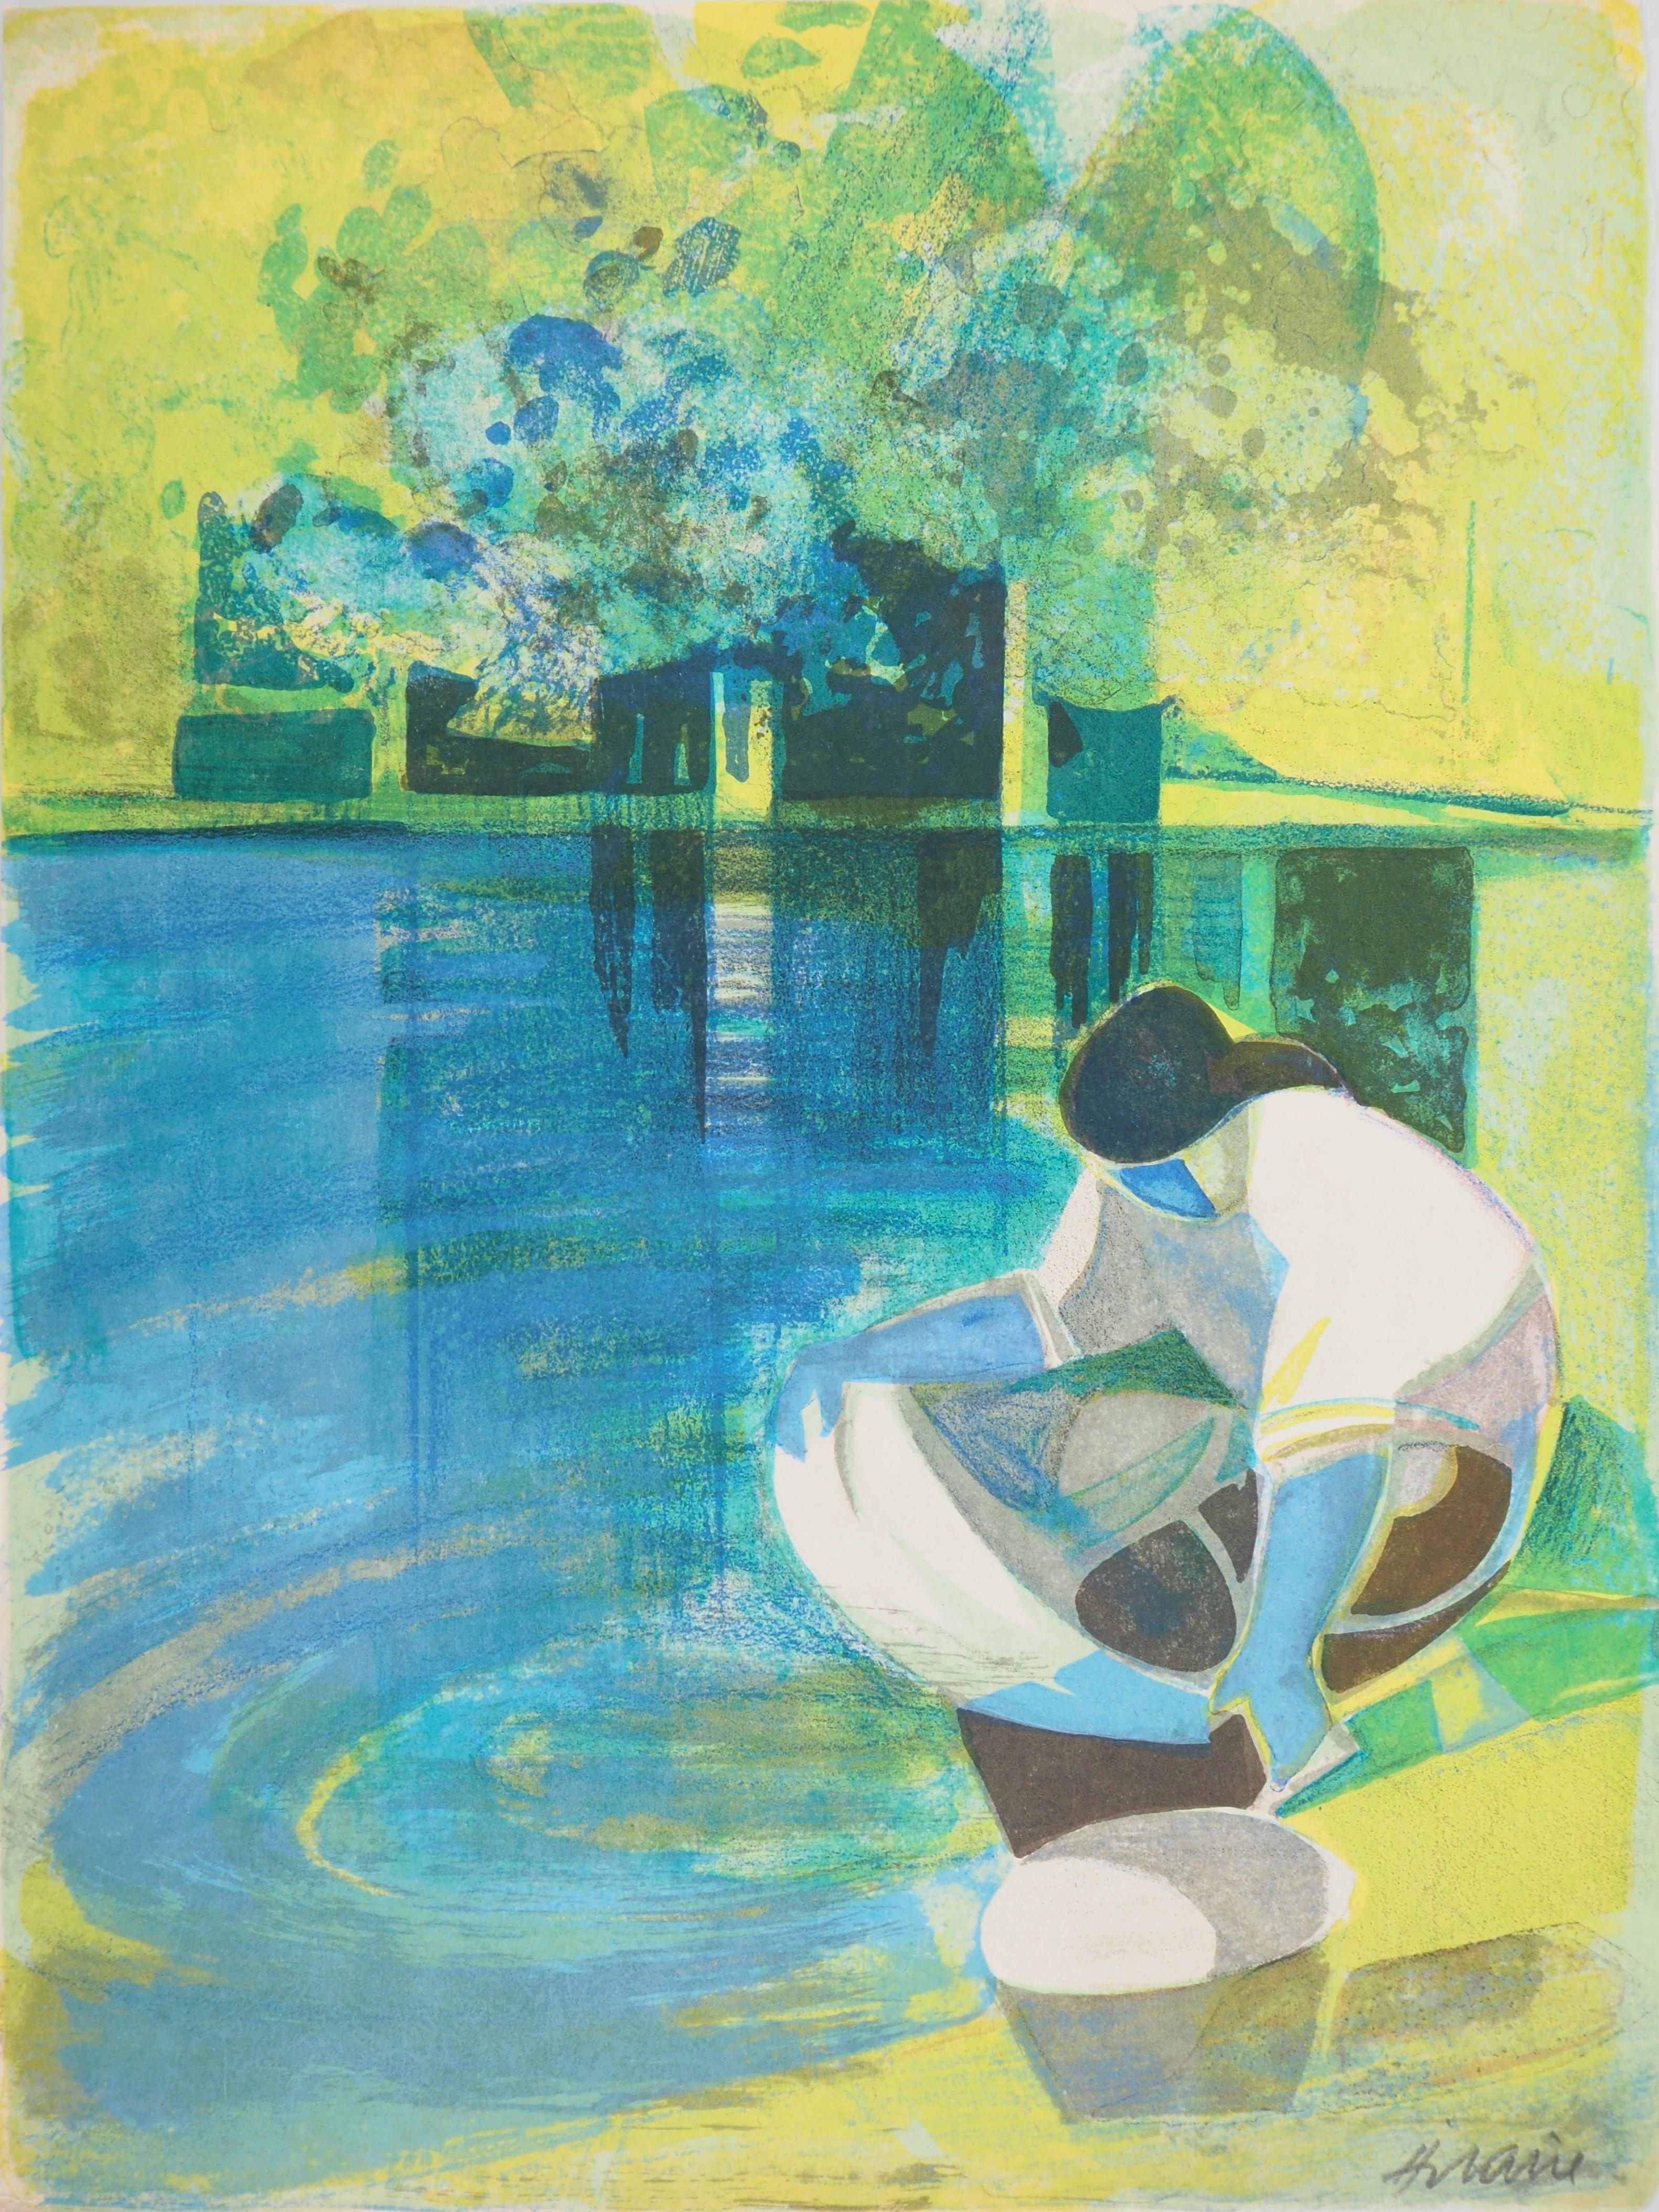 Rivers in France : The Washerwoman - Original handsigned lithograph